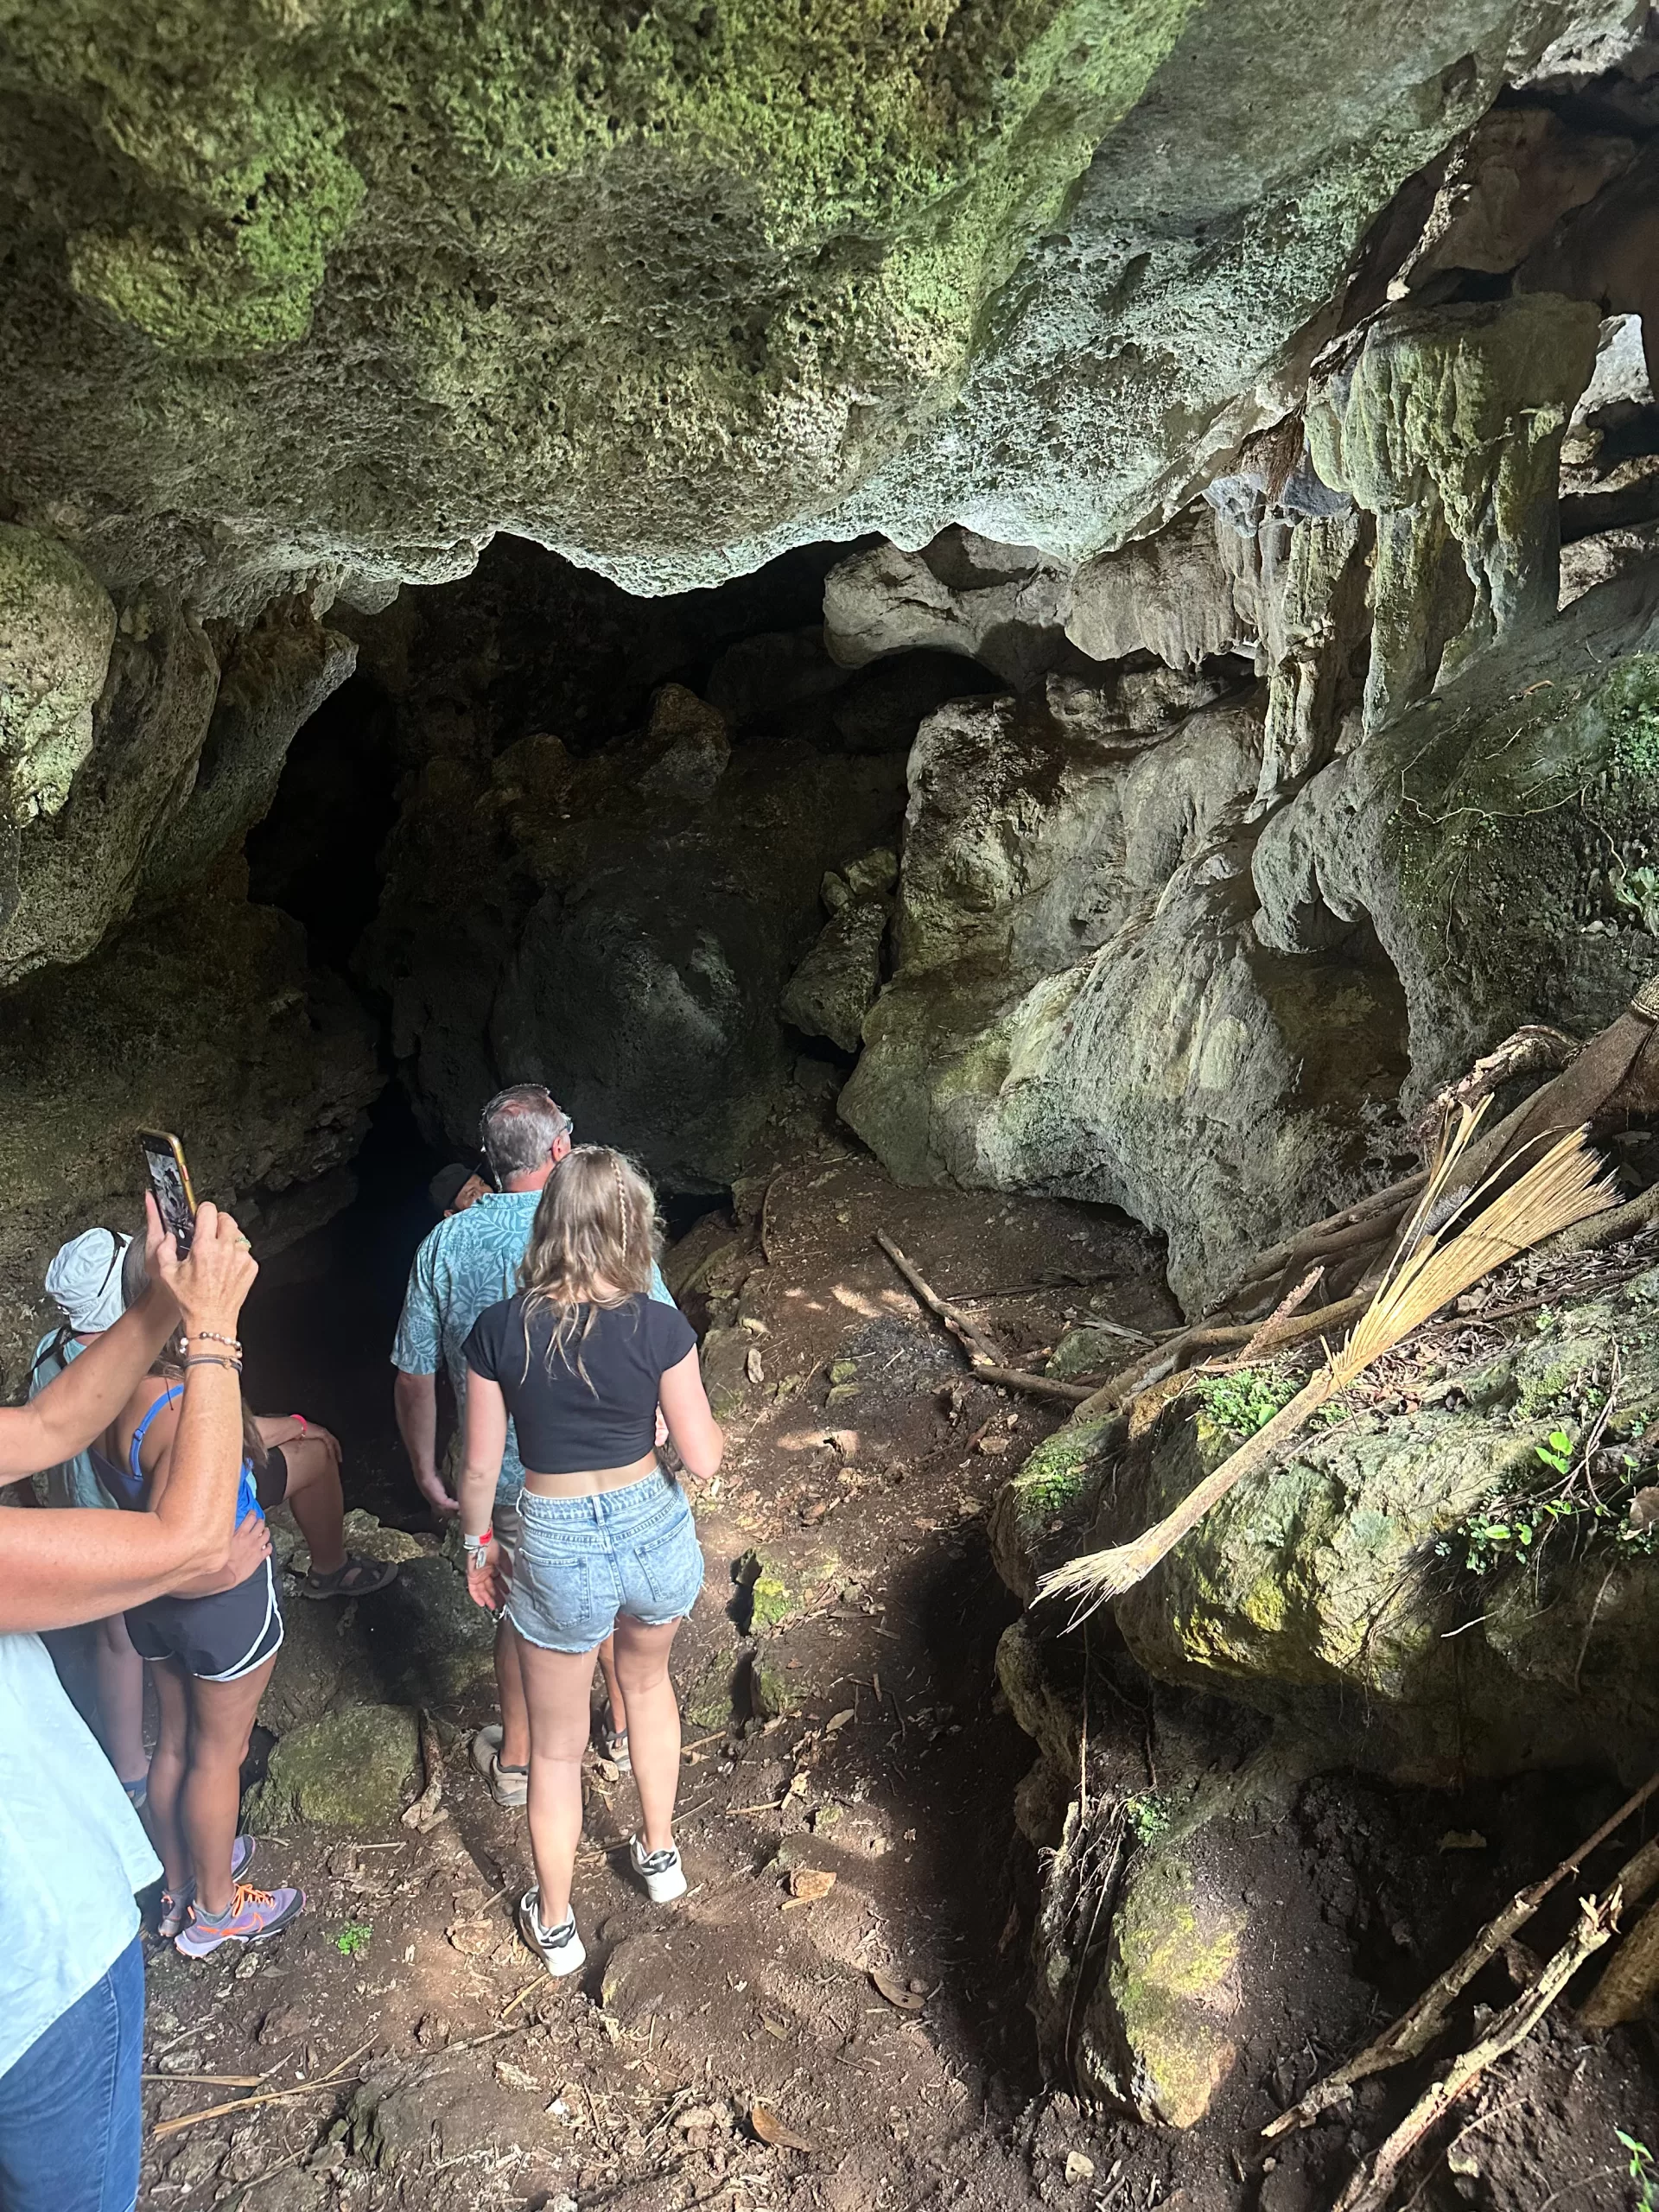 Four KIK visitors taking photos and entering a cave on the property.